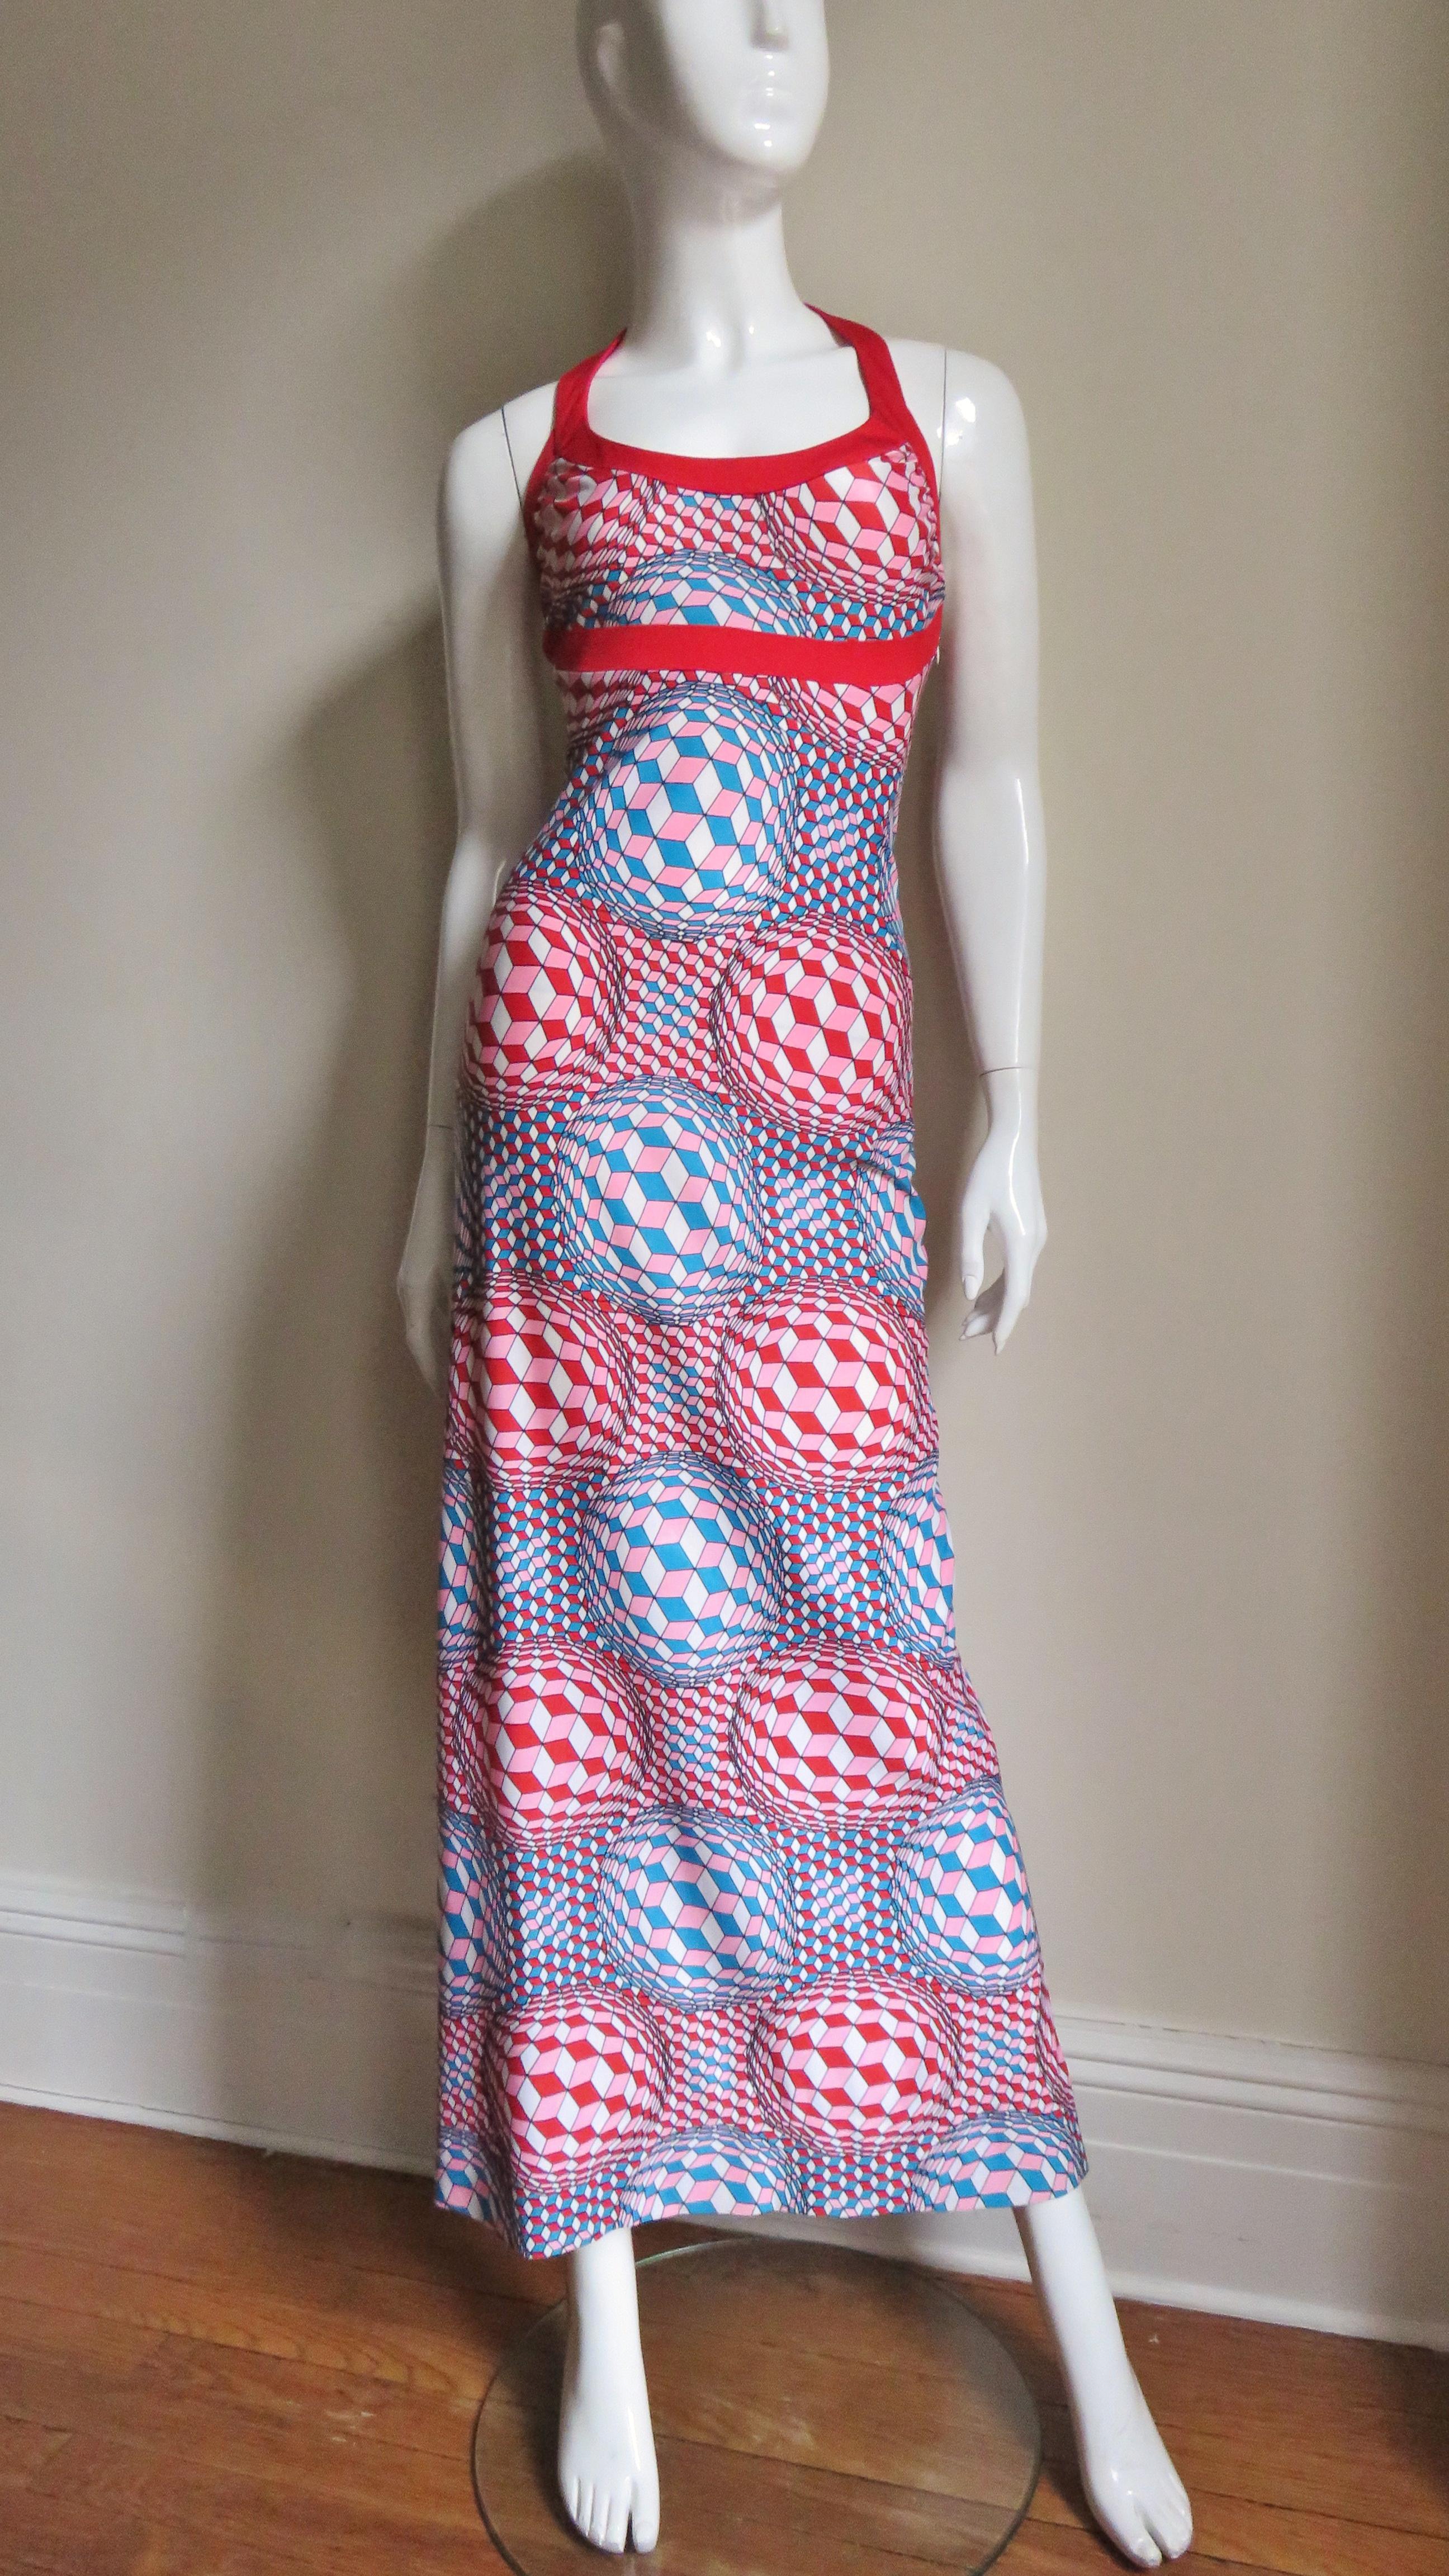 A great jersey halter dress in a turquoise, red, pink and white optical illusion print from Robert Morton..  It is semi fitted with a halter neck and a band of red around the neckline and under the bust. It comes with a matching open jacket with